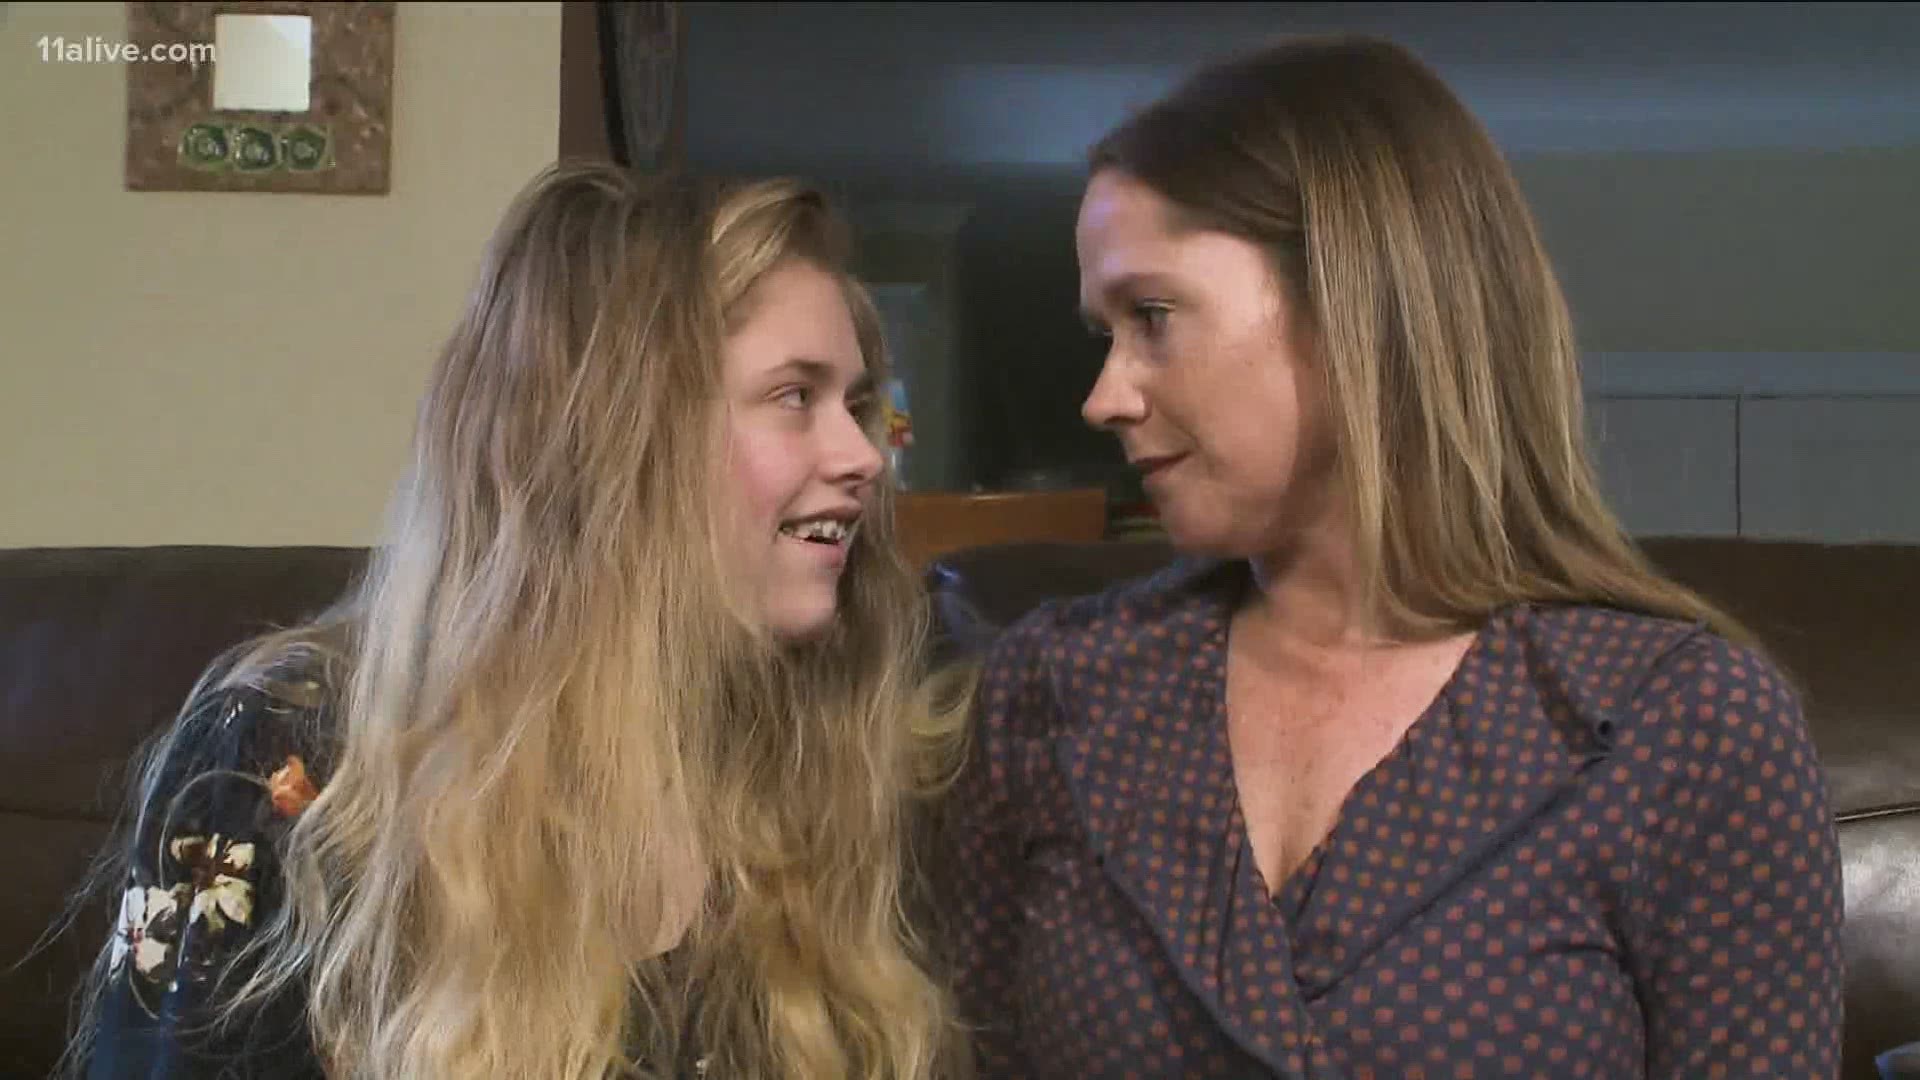 11Alive started the research by talking with several parents that made the decision to abandon their child or are struggling with the question.